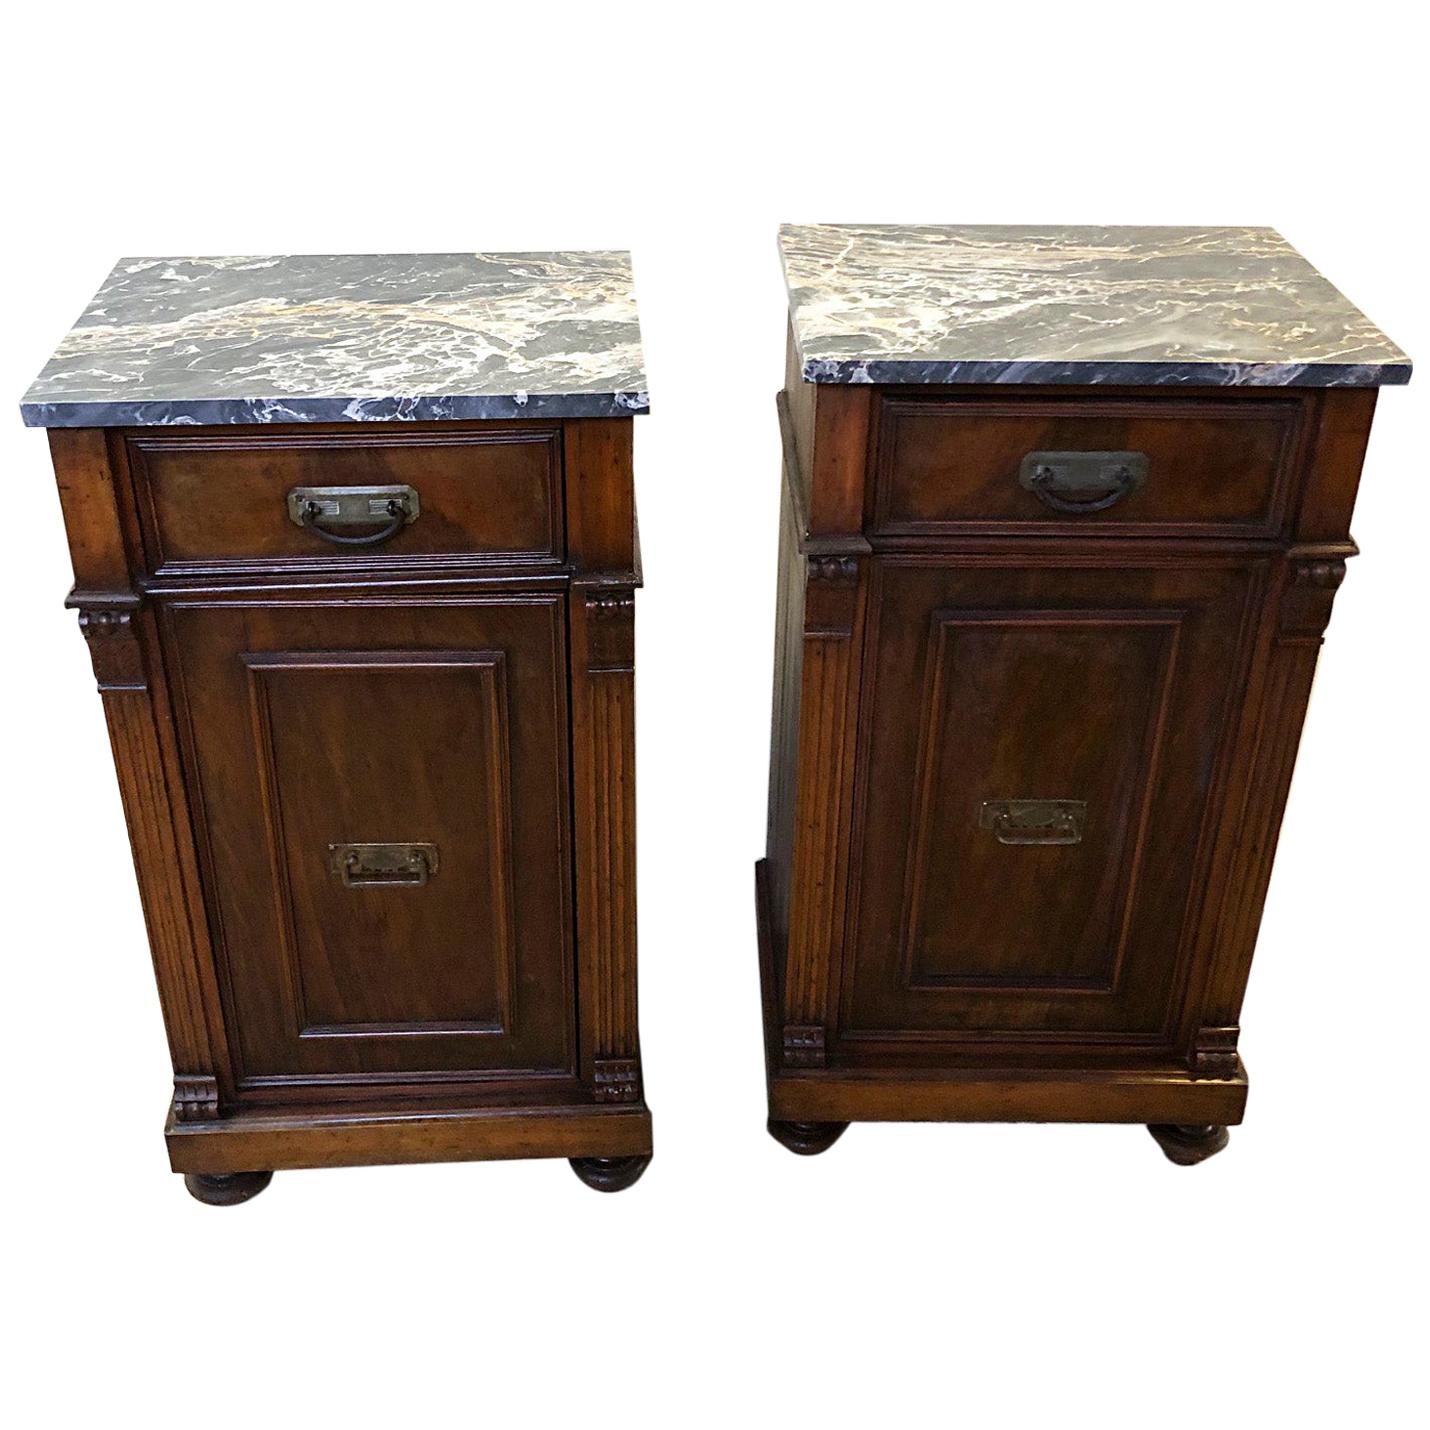 Pair of Italian Walnut Bedside Tables from 1880, Natural Color Portoro Marble